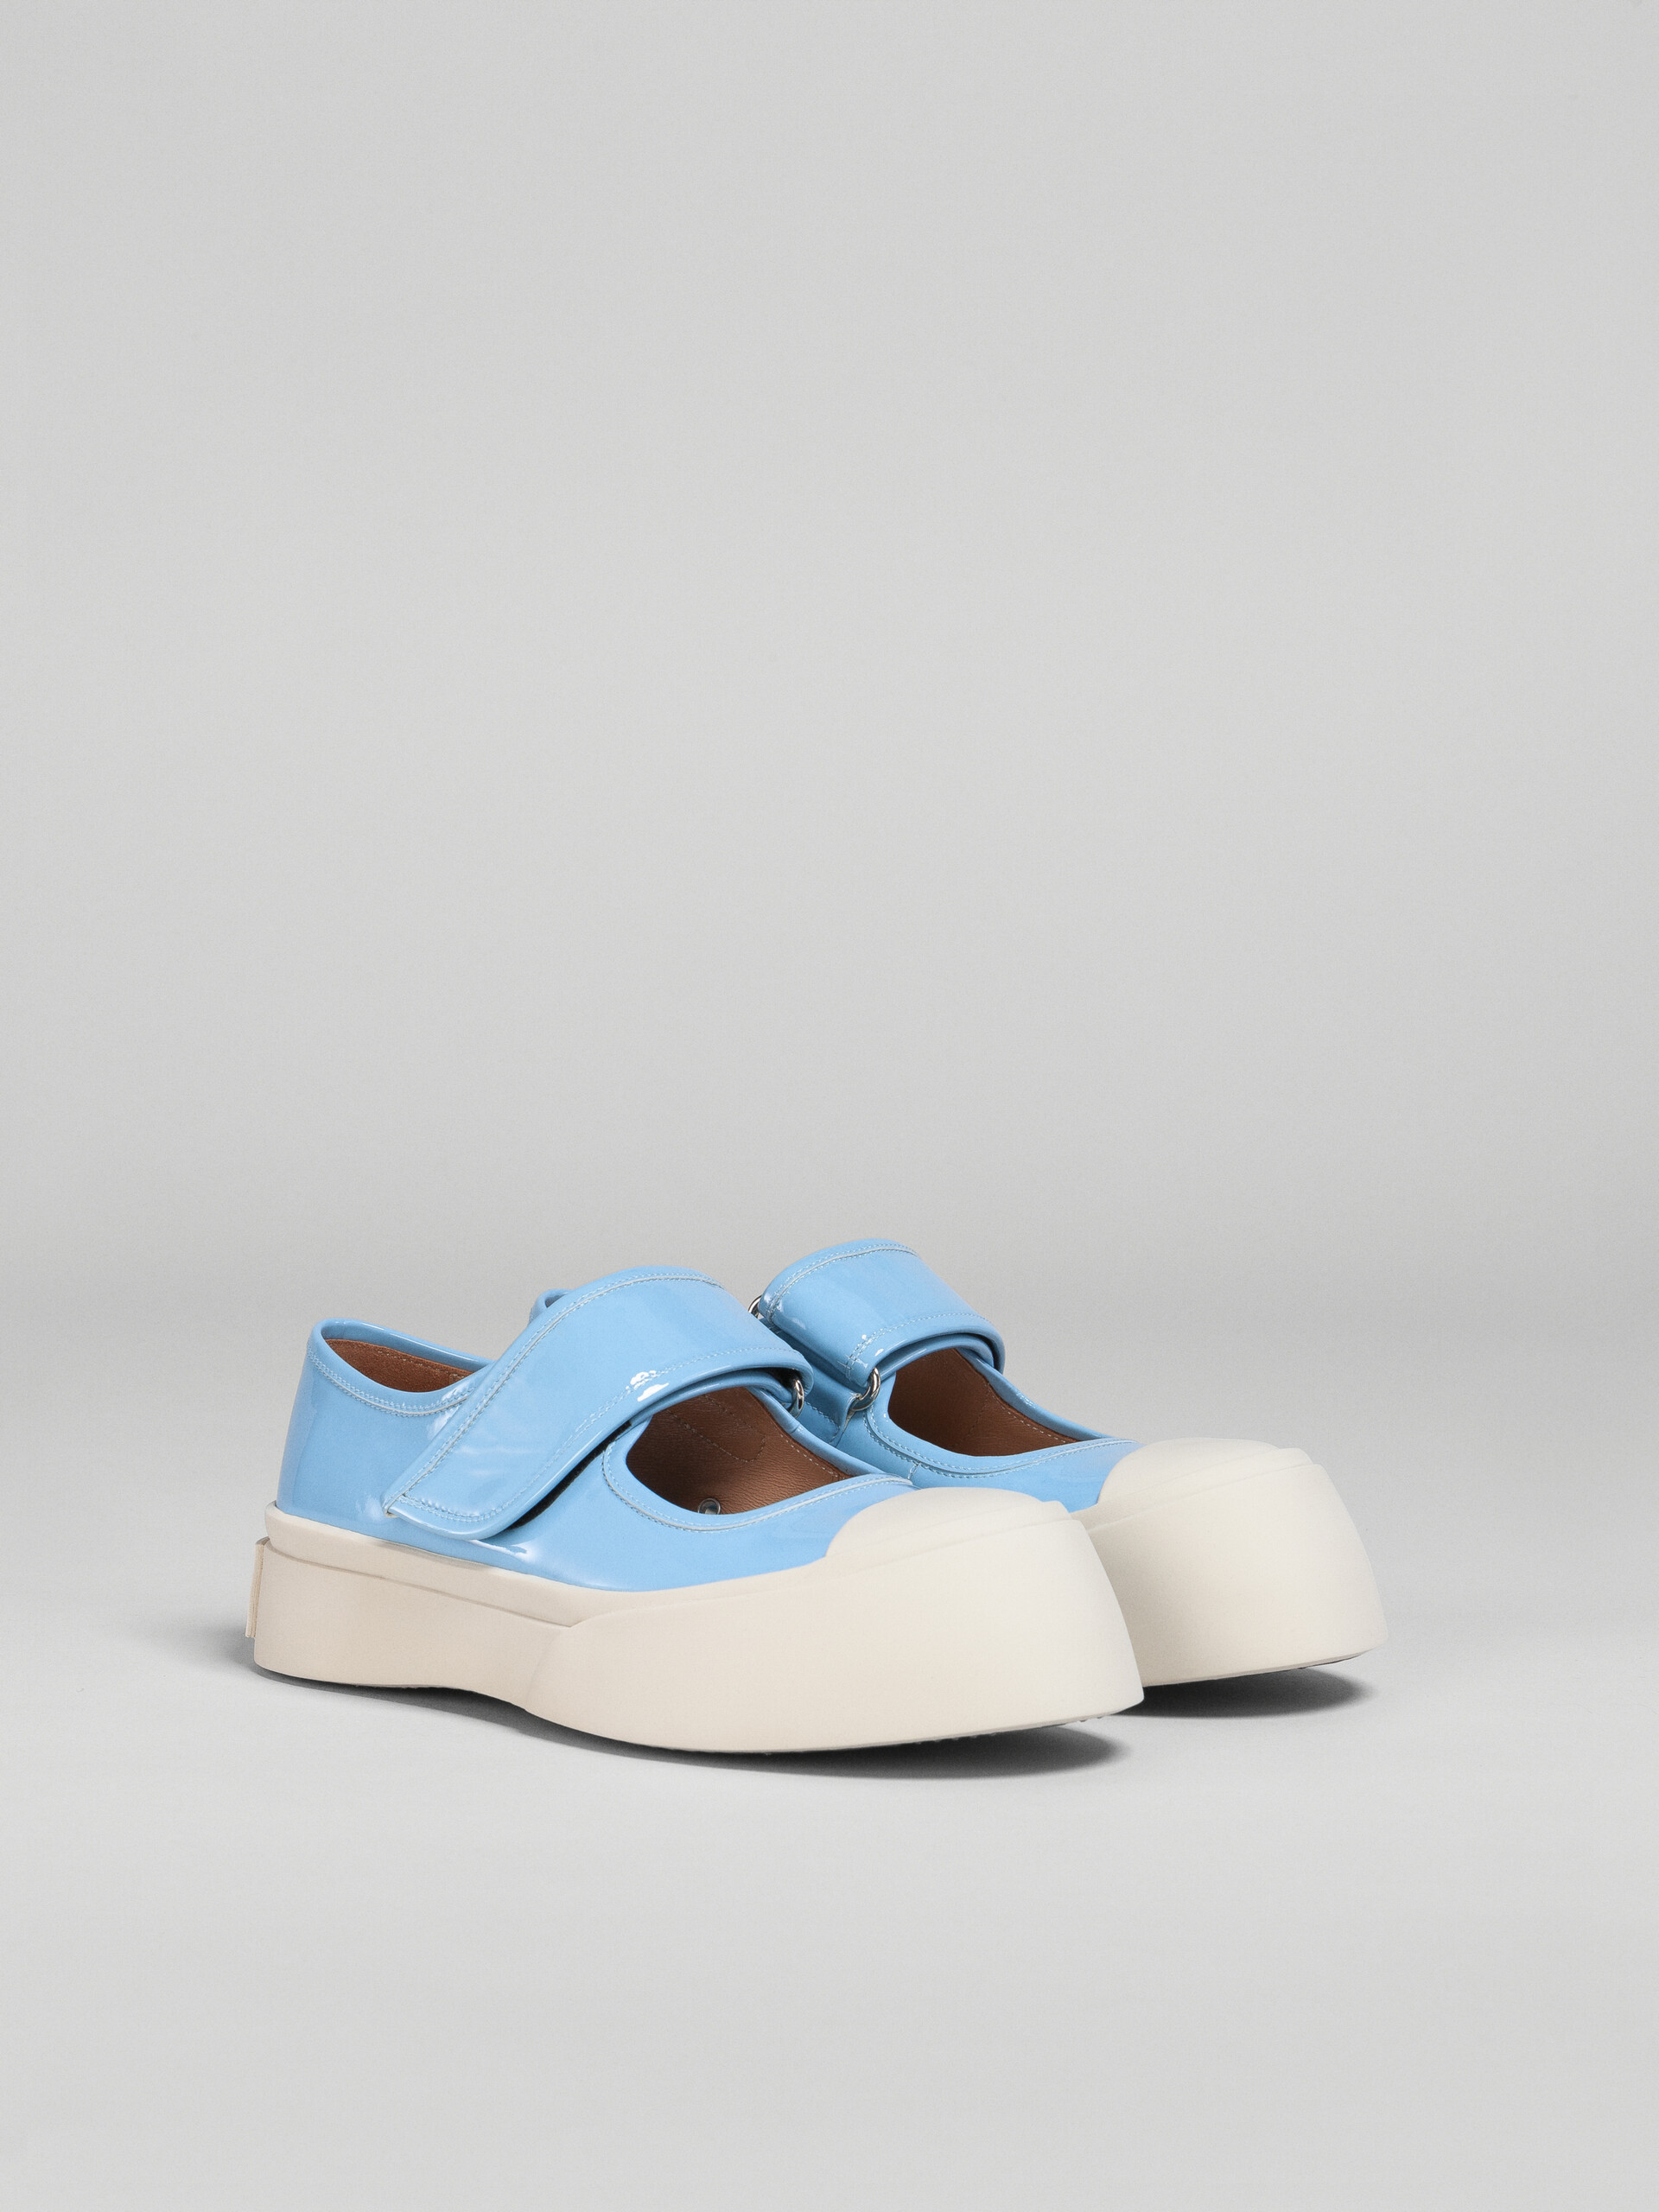 Pale blue patent leather PABLO Mary-Jane sneaker - Sneakers - Image 2